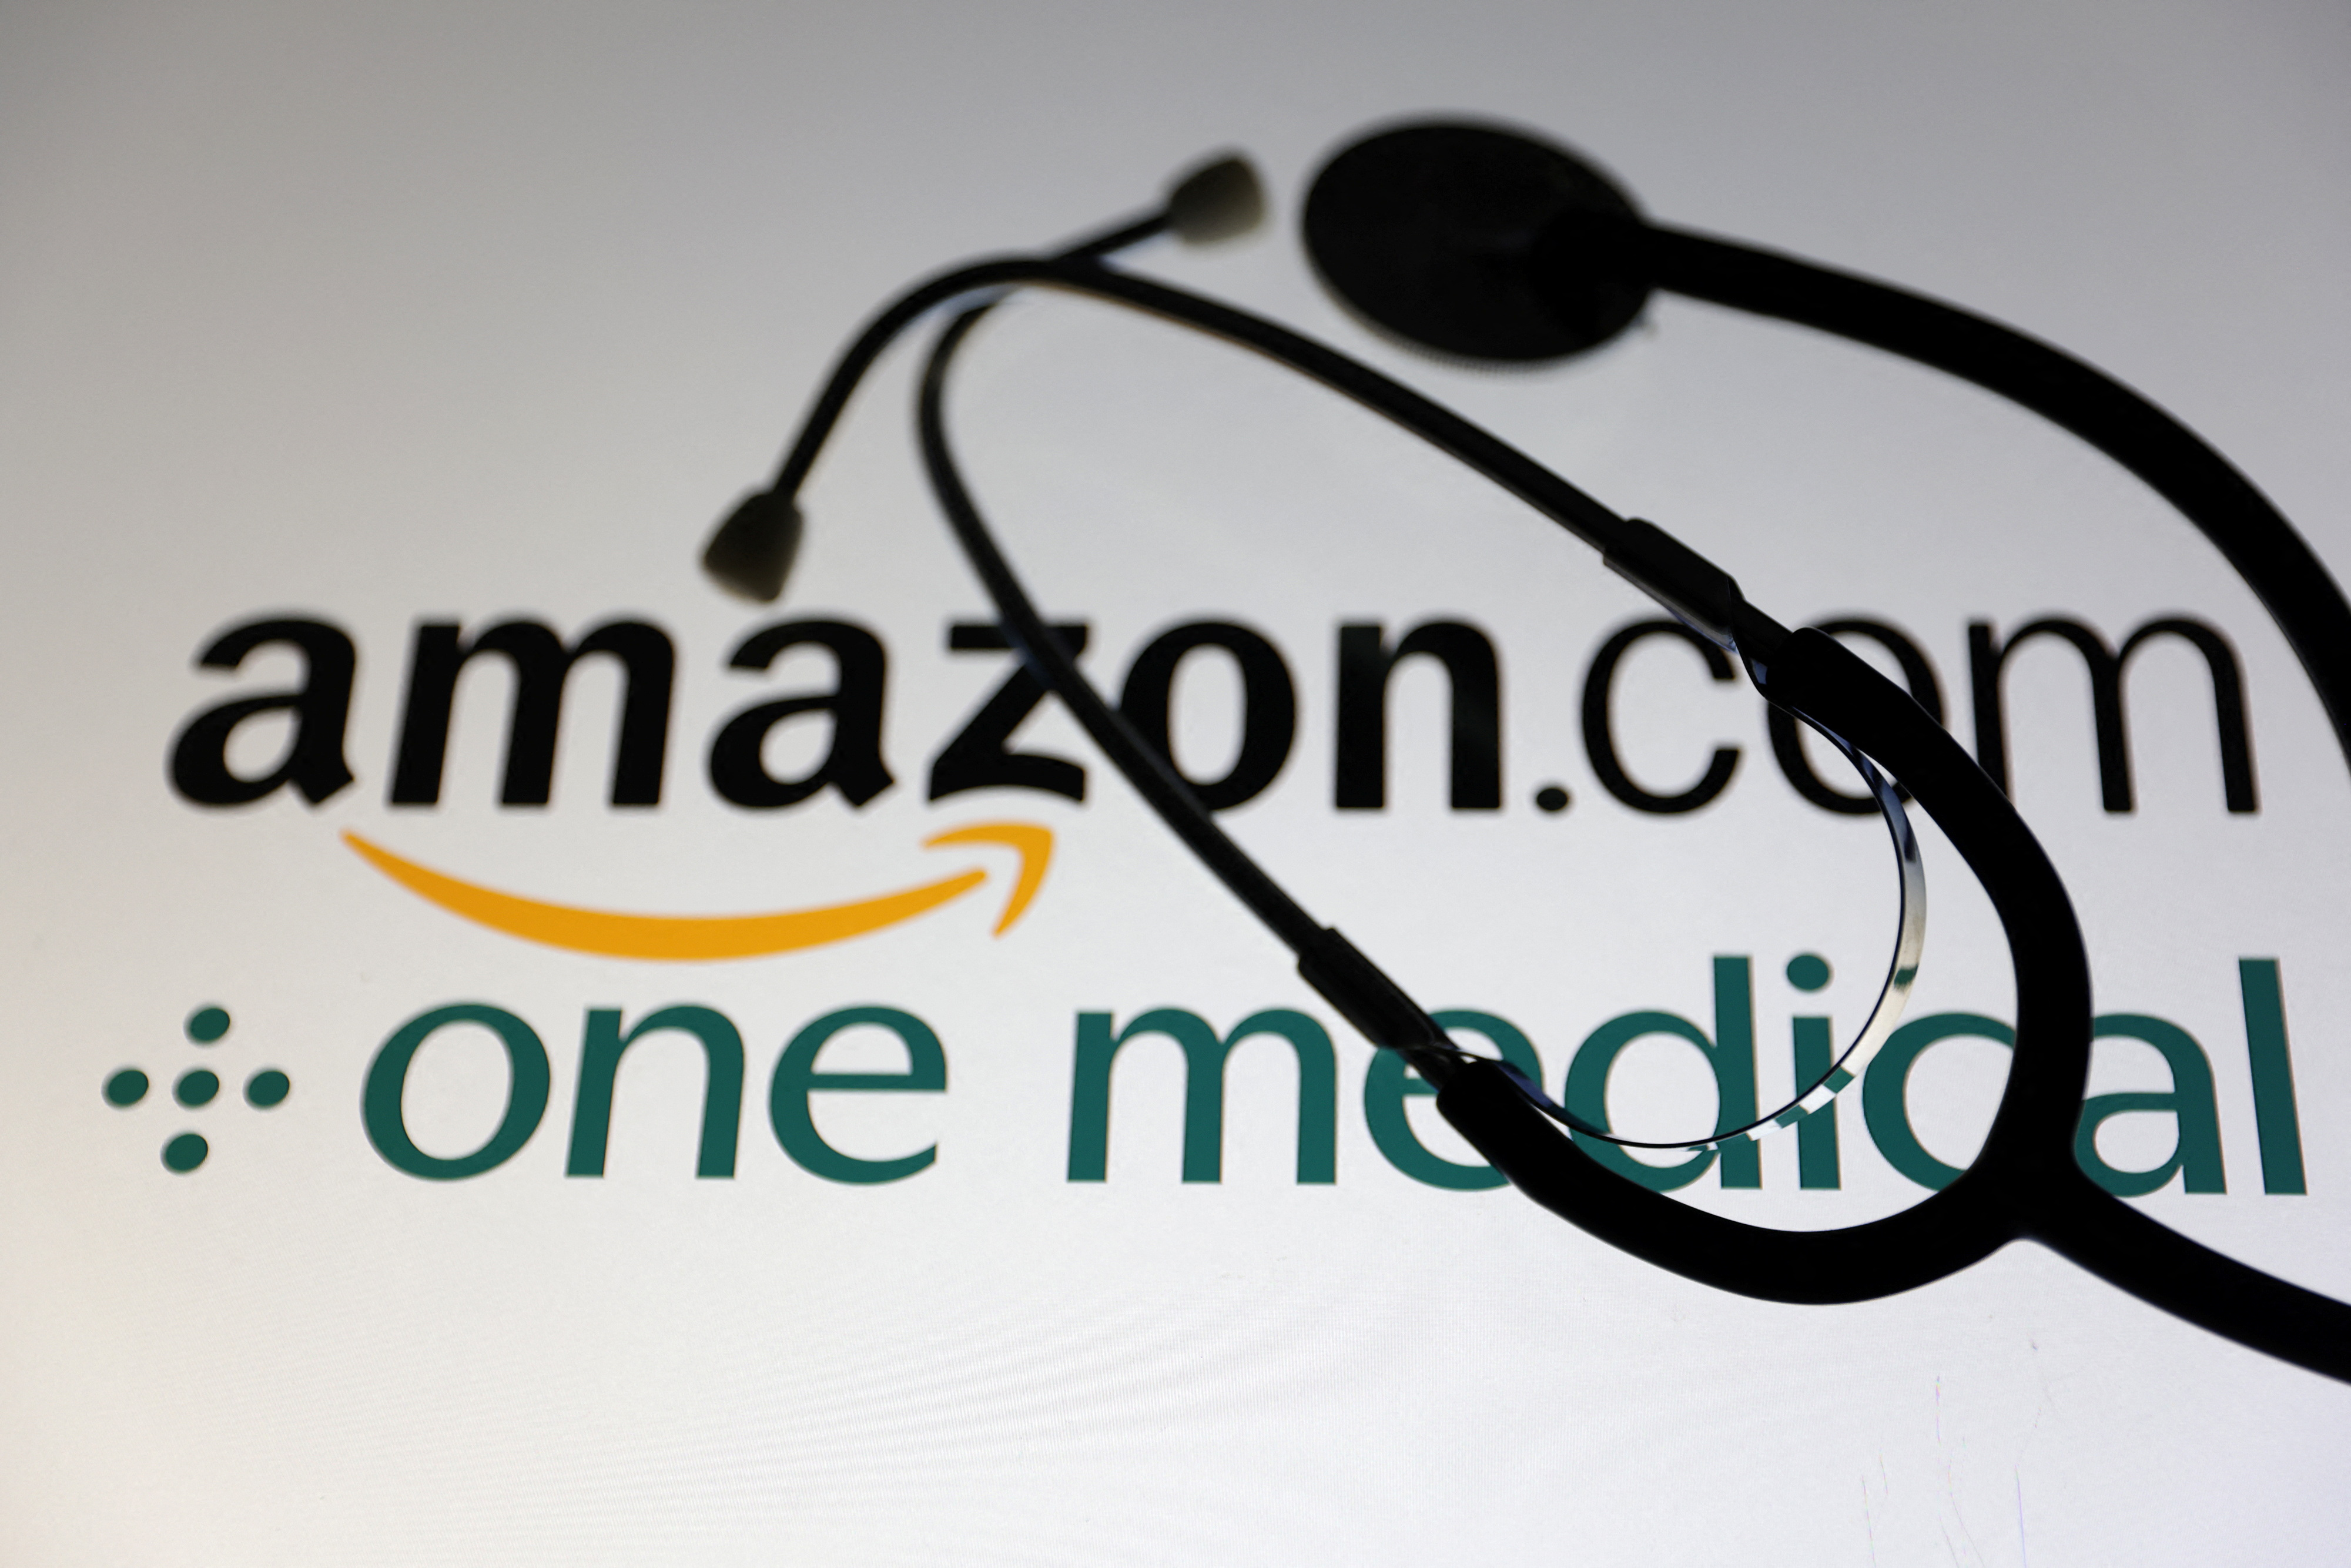 Illustration shows Amazon.com and One Medical logos